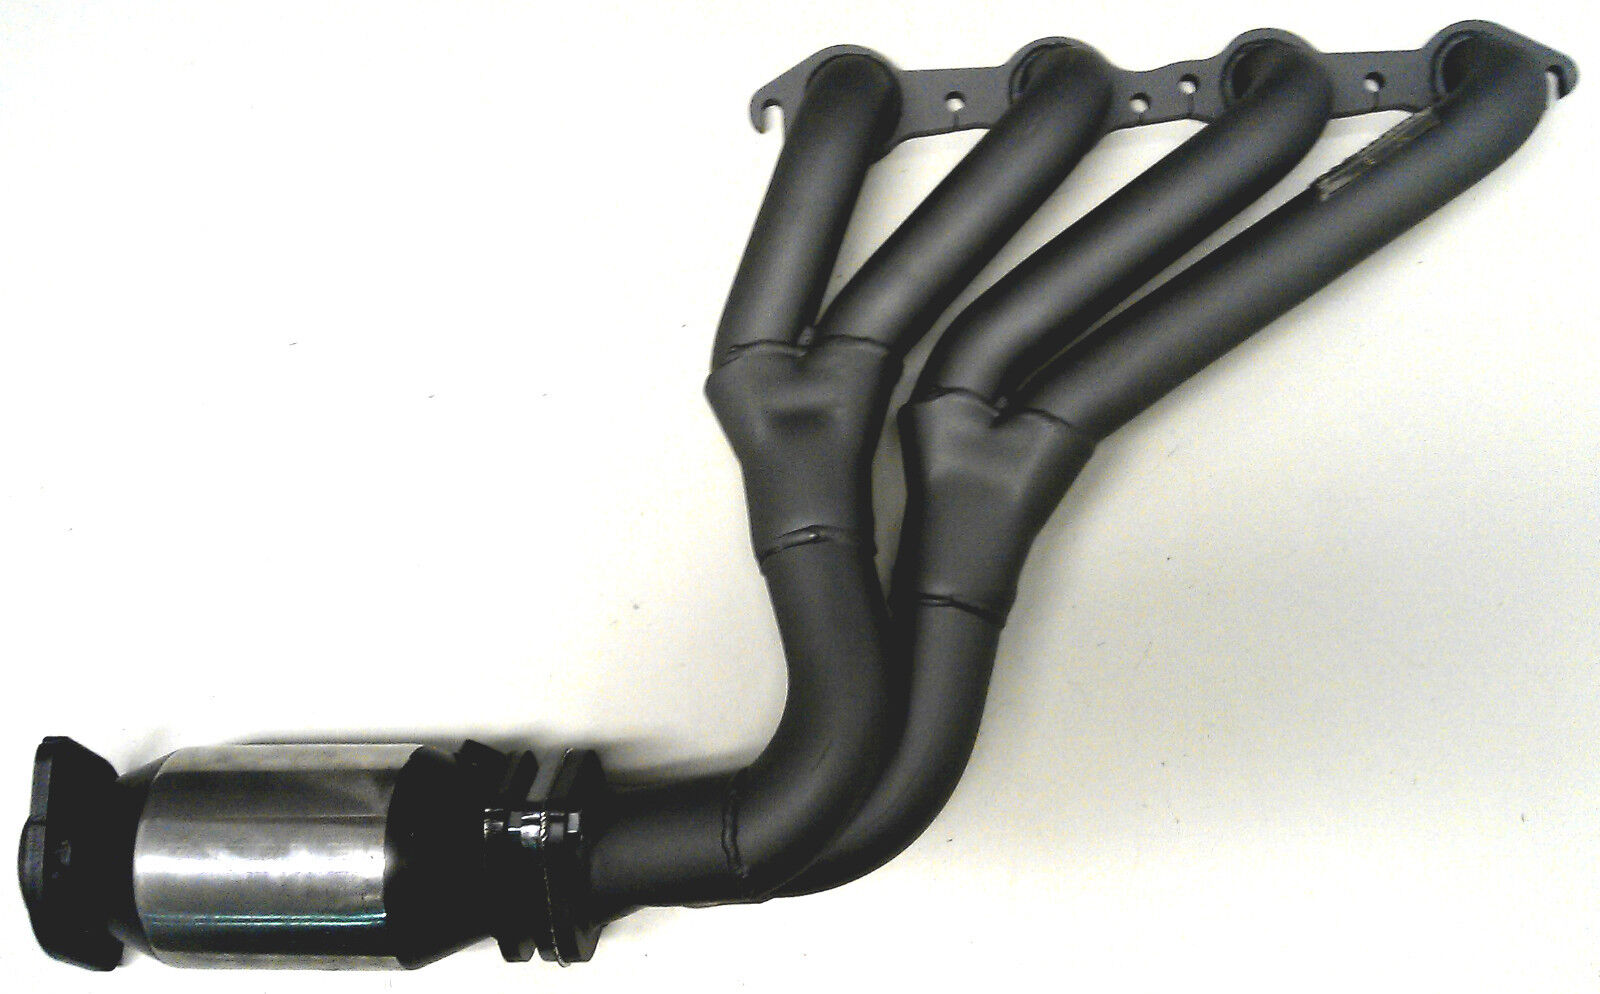 Holden Commodore VE V8 Headers / Extractors and High Flow Cats (6.0L, 6.2L)